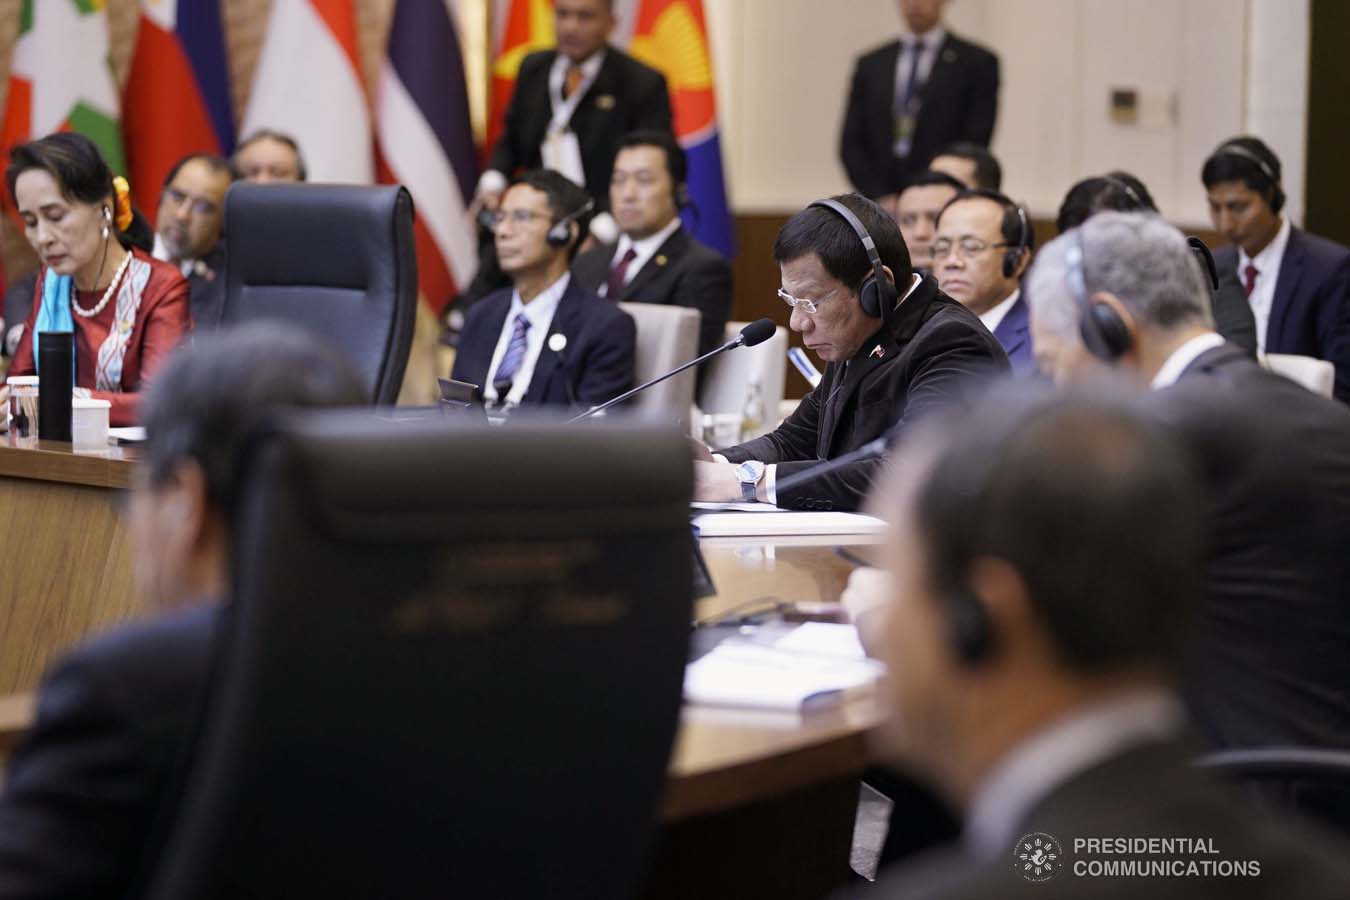 President Rodrigo Roa Duterte joins other leaders from the Association of Southeast Asian Nations (ASEAN) and Republic of Korea President Moon Jae-in during the plenary session of the ASEAN-Republic of Korea Commemorative Summit at the Busan Exhibition and Convention Center on November 26, 2019. ARMAN BAYLON/PRESIDENTIAL PHOTO